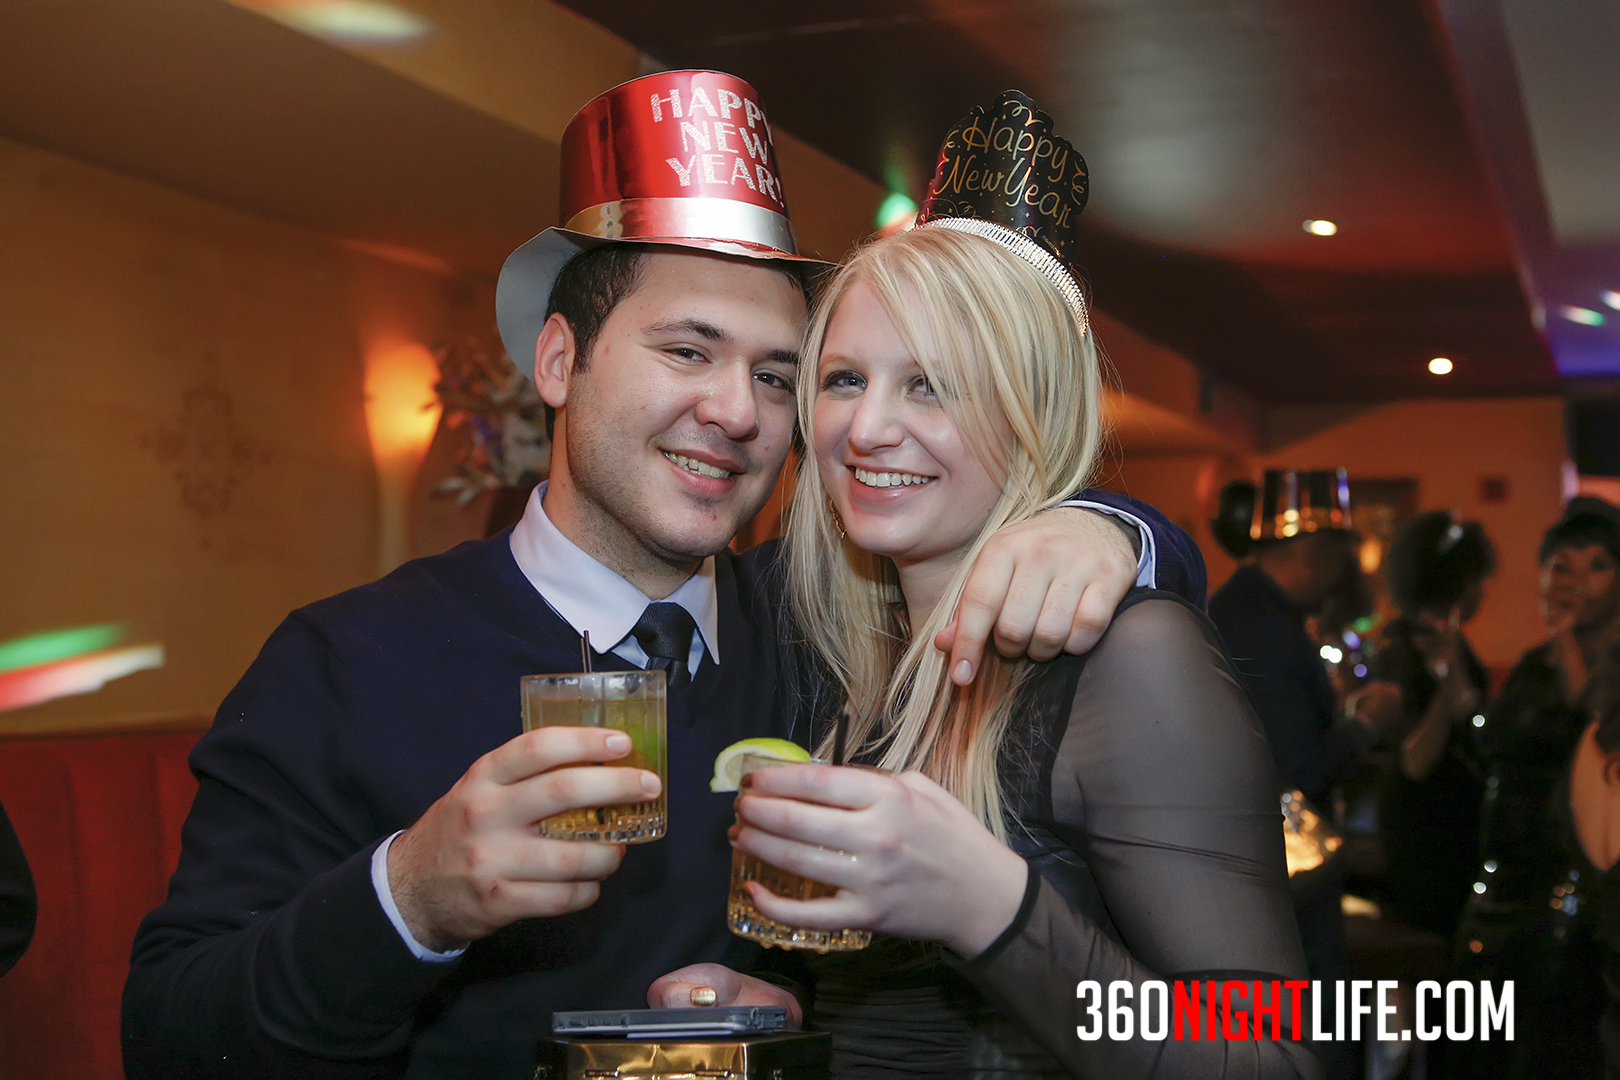 A couple celebrating New Year's Eve in Washington DC at the 90's New Year's Eve Party - Back in Da Day - Presented by 360nightlife.com